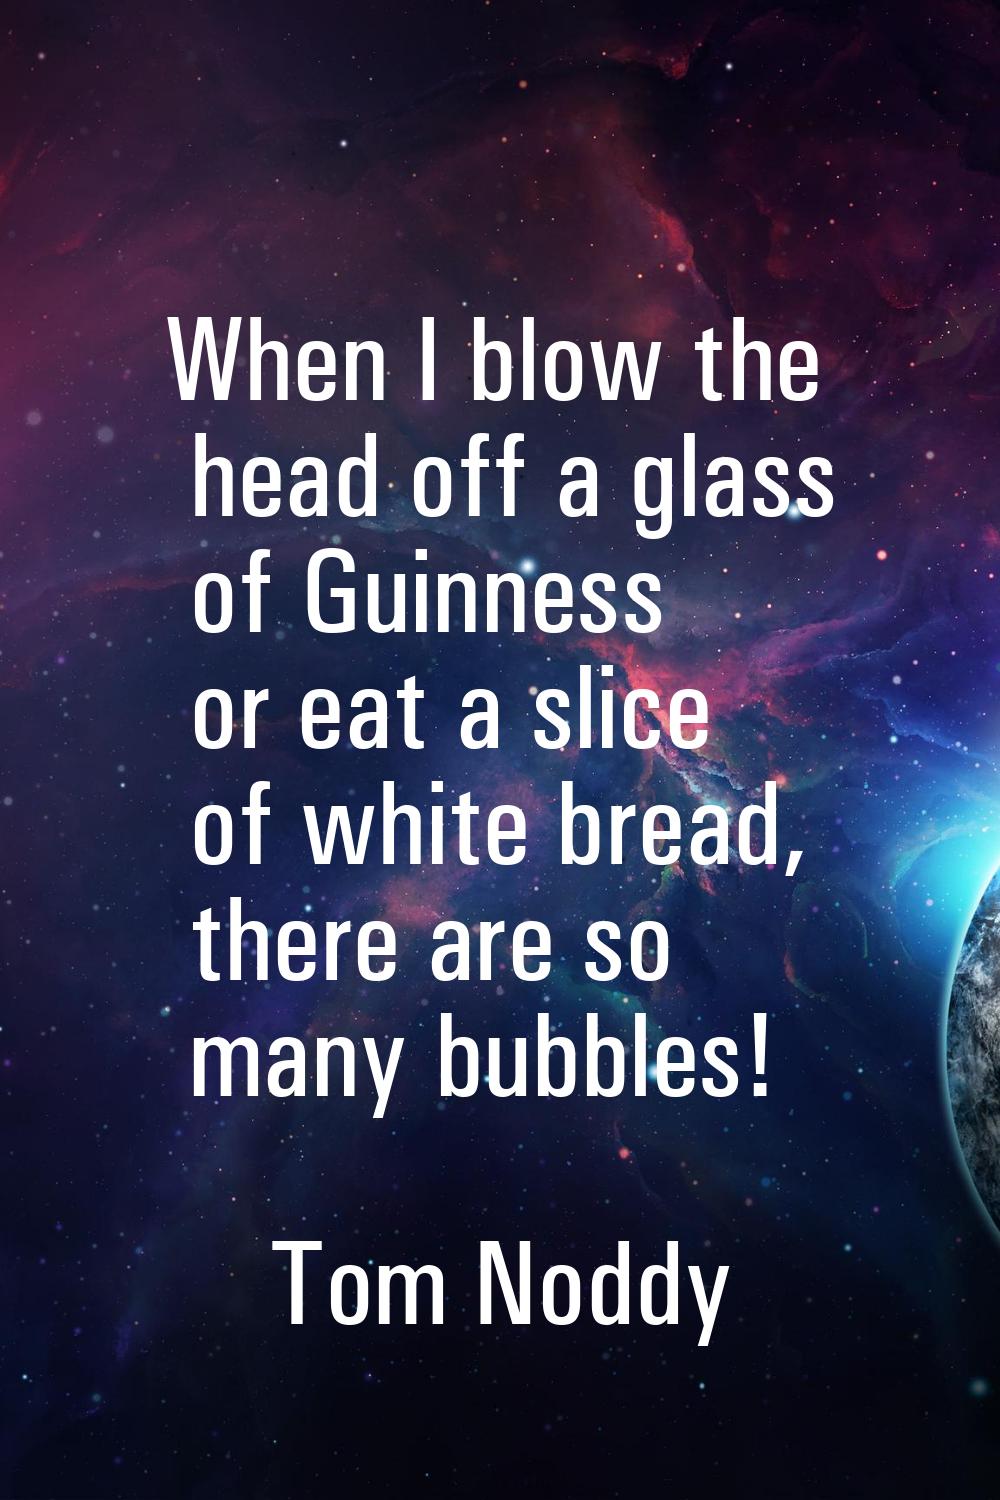 When I blow the head off a glass of Guinness or eat a slice of white bread, there are so many bubbl